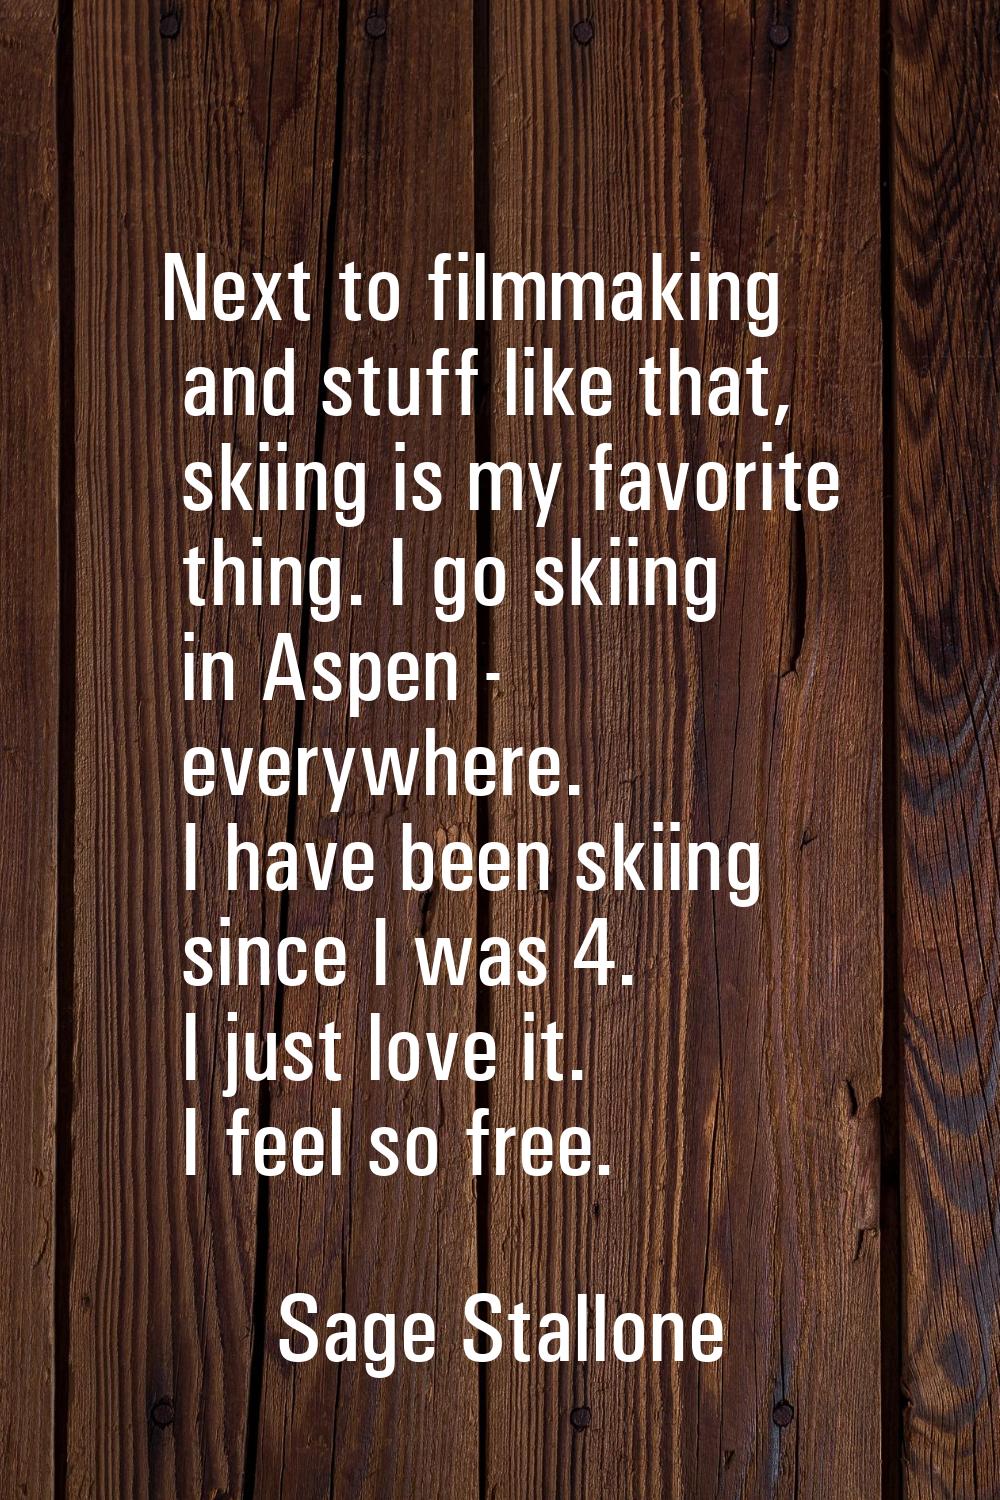 Next to filmmaking and stuff like that, skiing is my favorite thing. I go skiing in Aspen - everywh